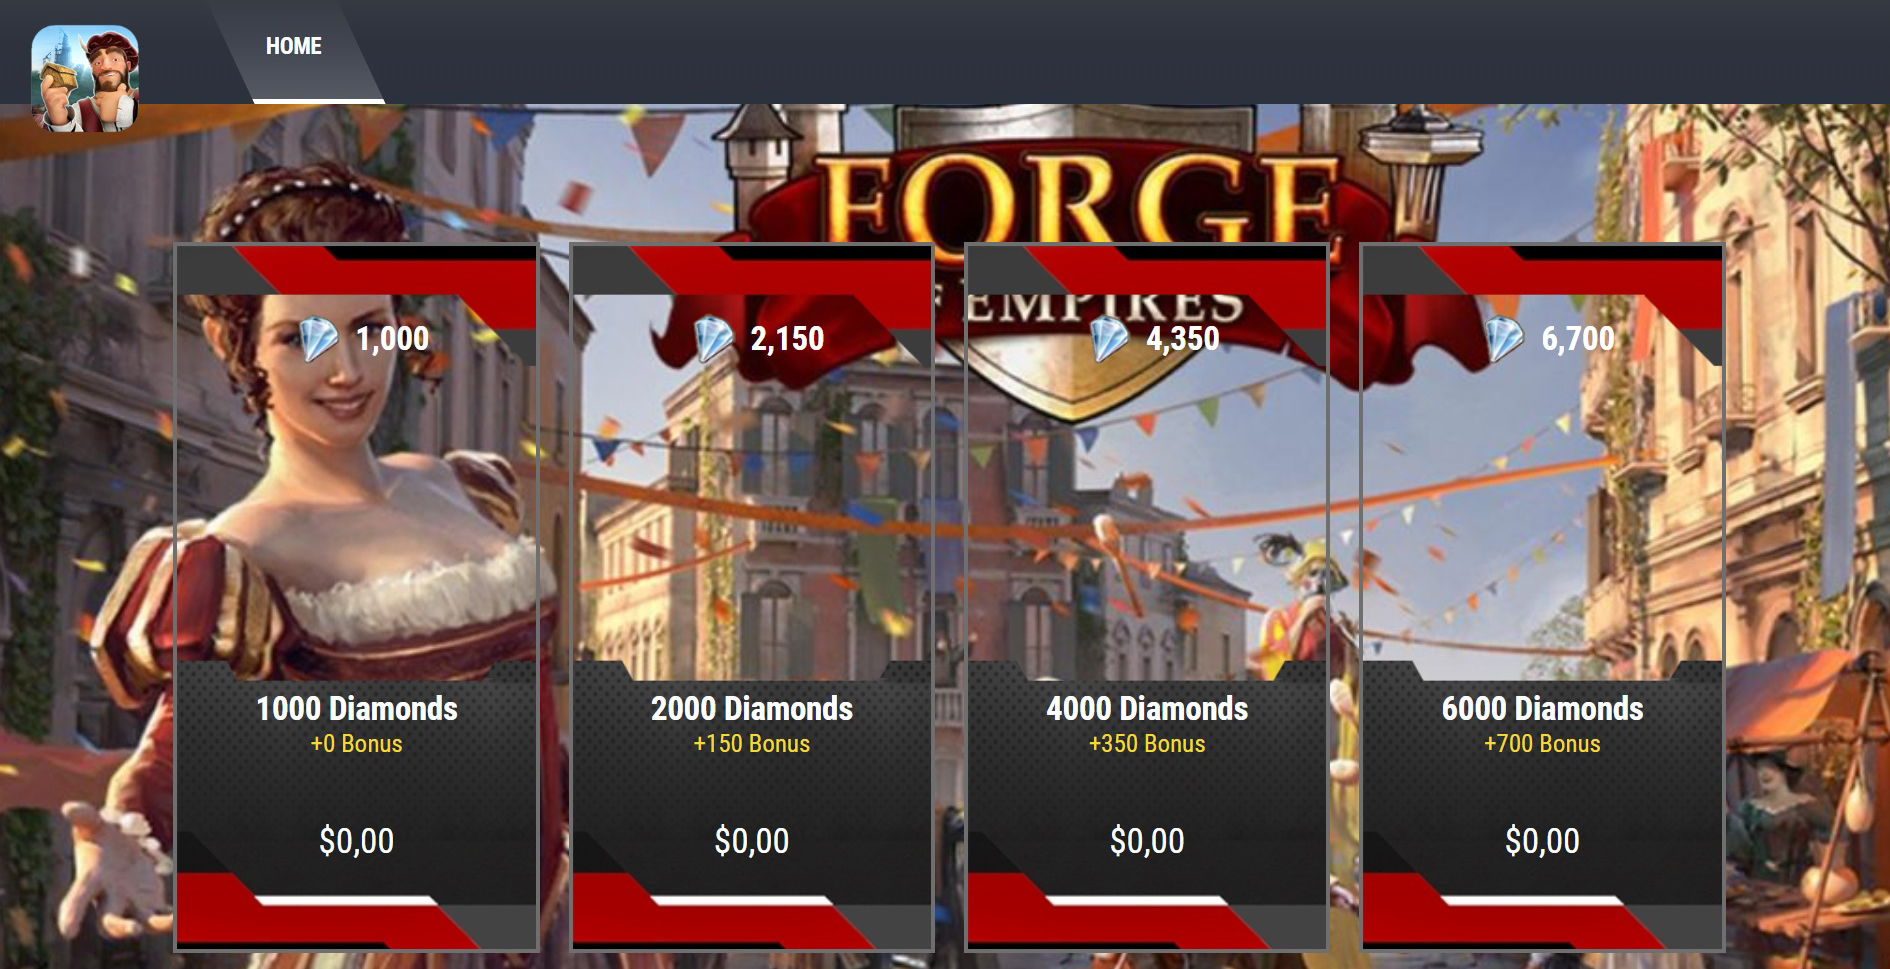 how do you get more diamonds in forge of empires